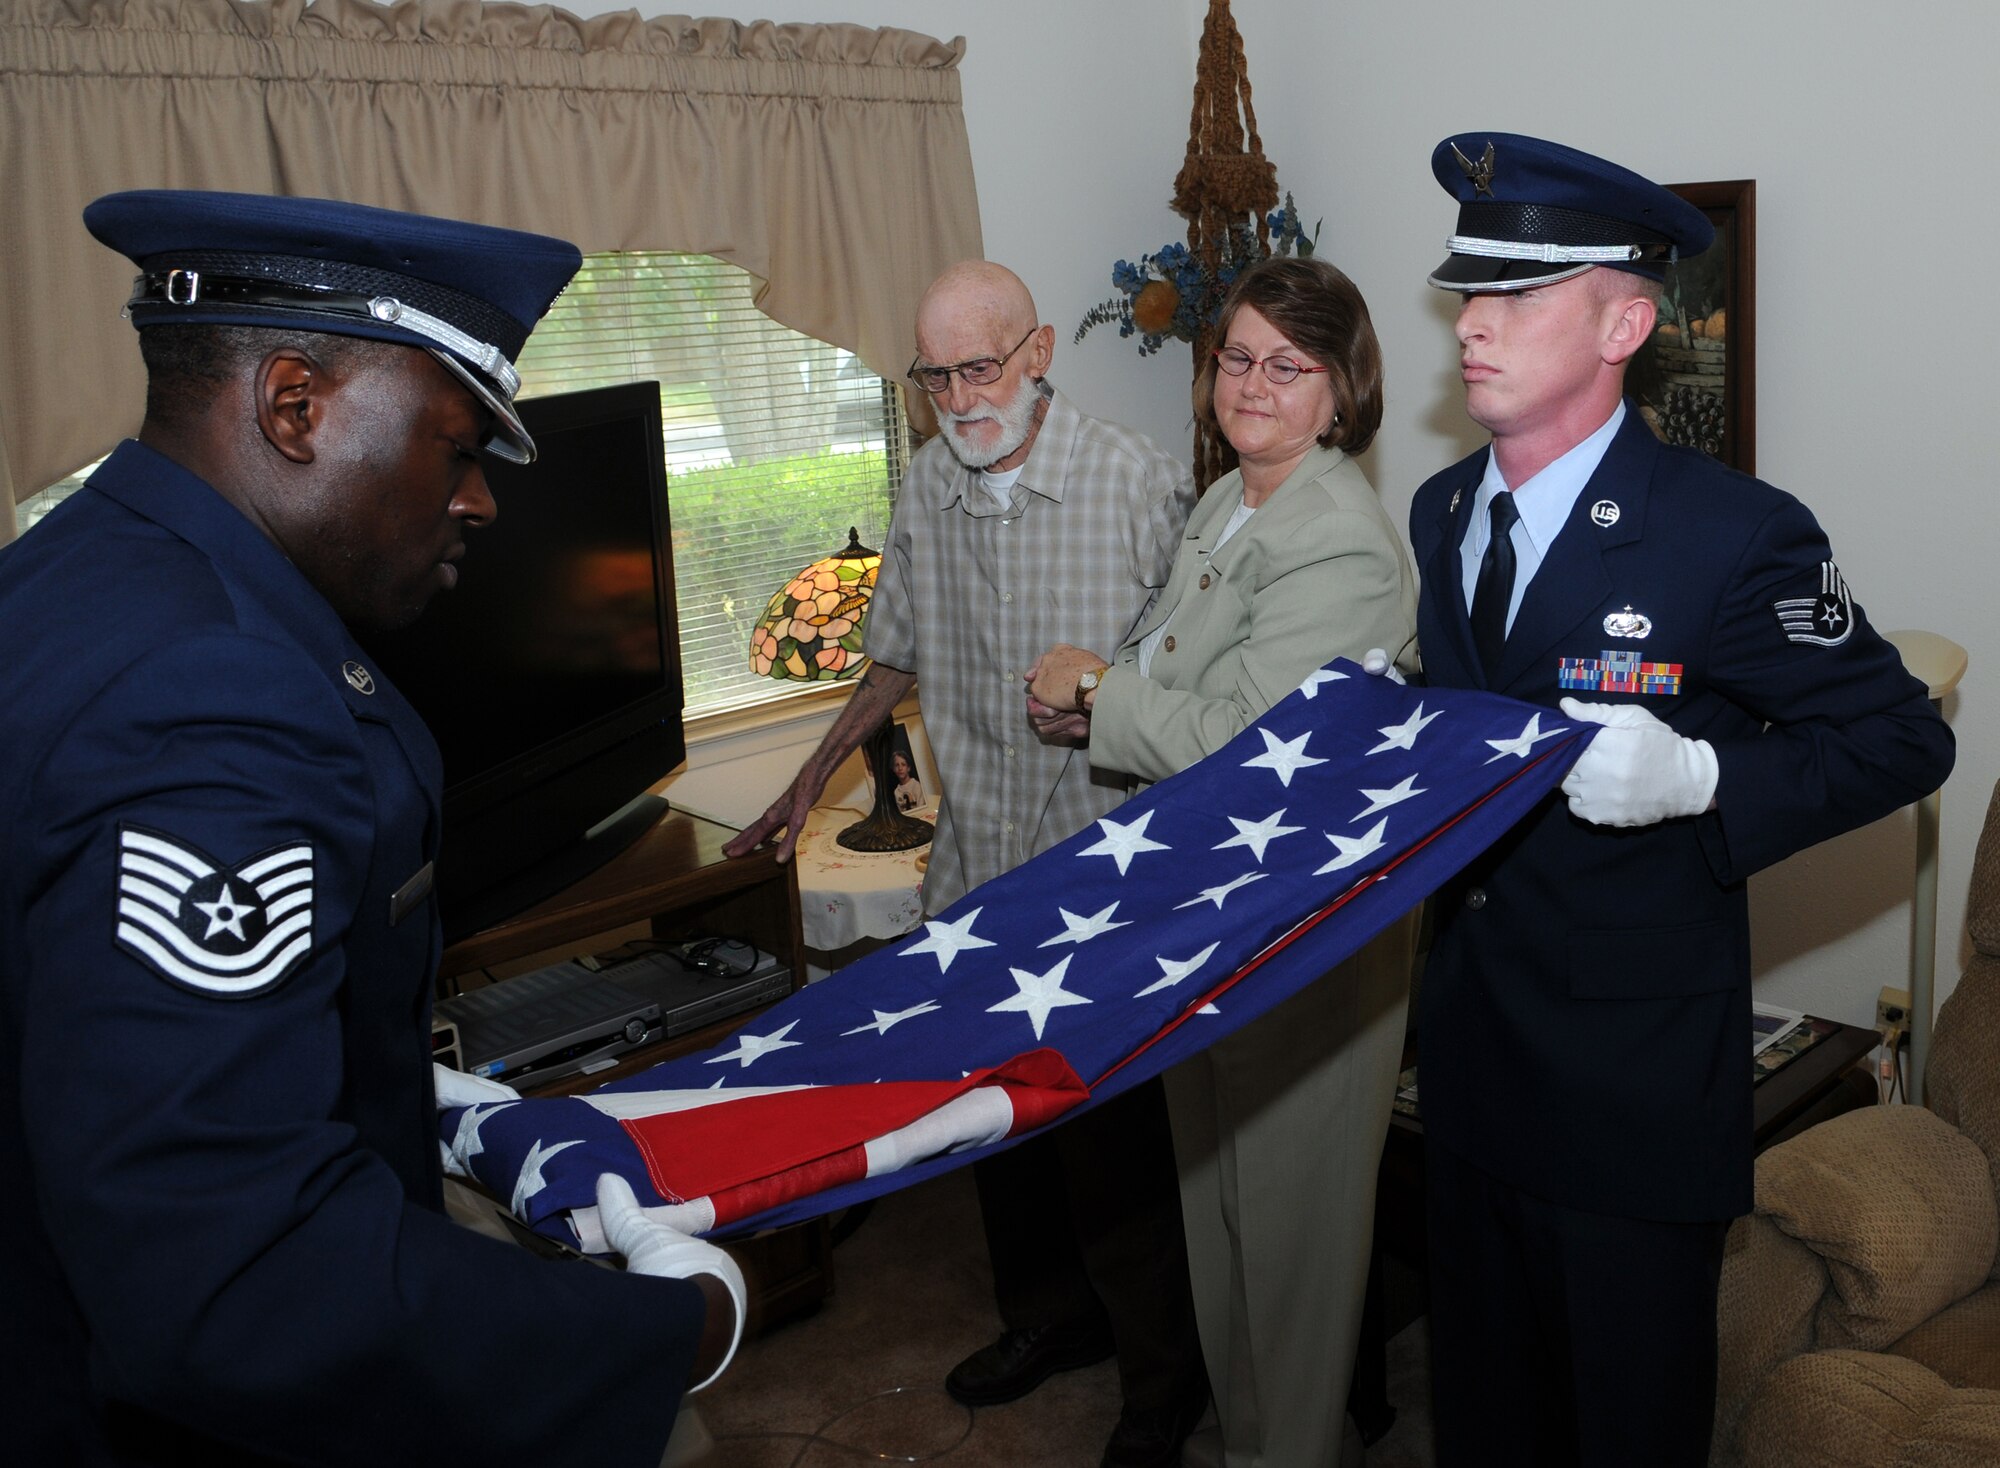 Tech. Sgt. Michael Nelson and Staff Sgt. Shane Antrim, Air Force Personnel Center, fold a flag before presenting it to retired Tech. Sgt. Billy Oldham in honor of his many years in service to his country. Randolph Air Force Base Airmen volunteered to perform the special ceremony at the request Sergeant Oldham?s daughter, Sherrill. (U.S. Air Force photo by Don Lindsey)